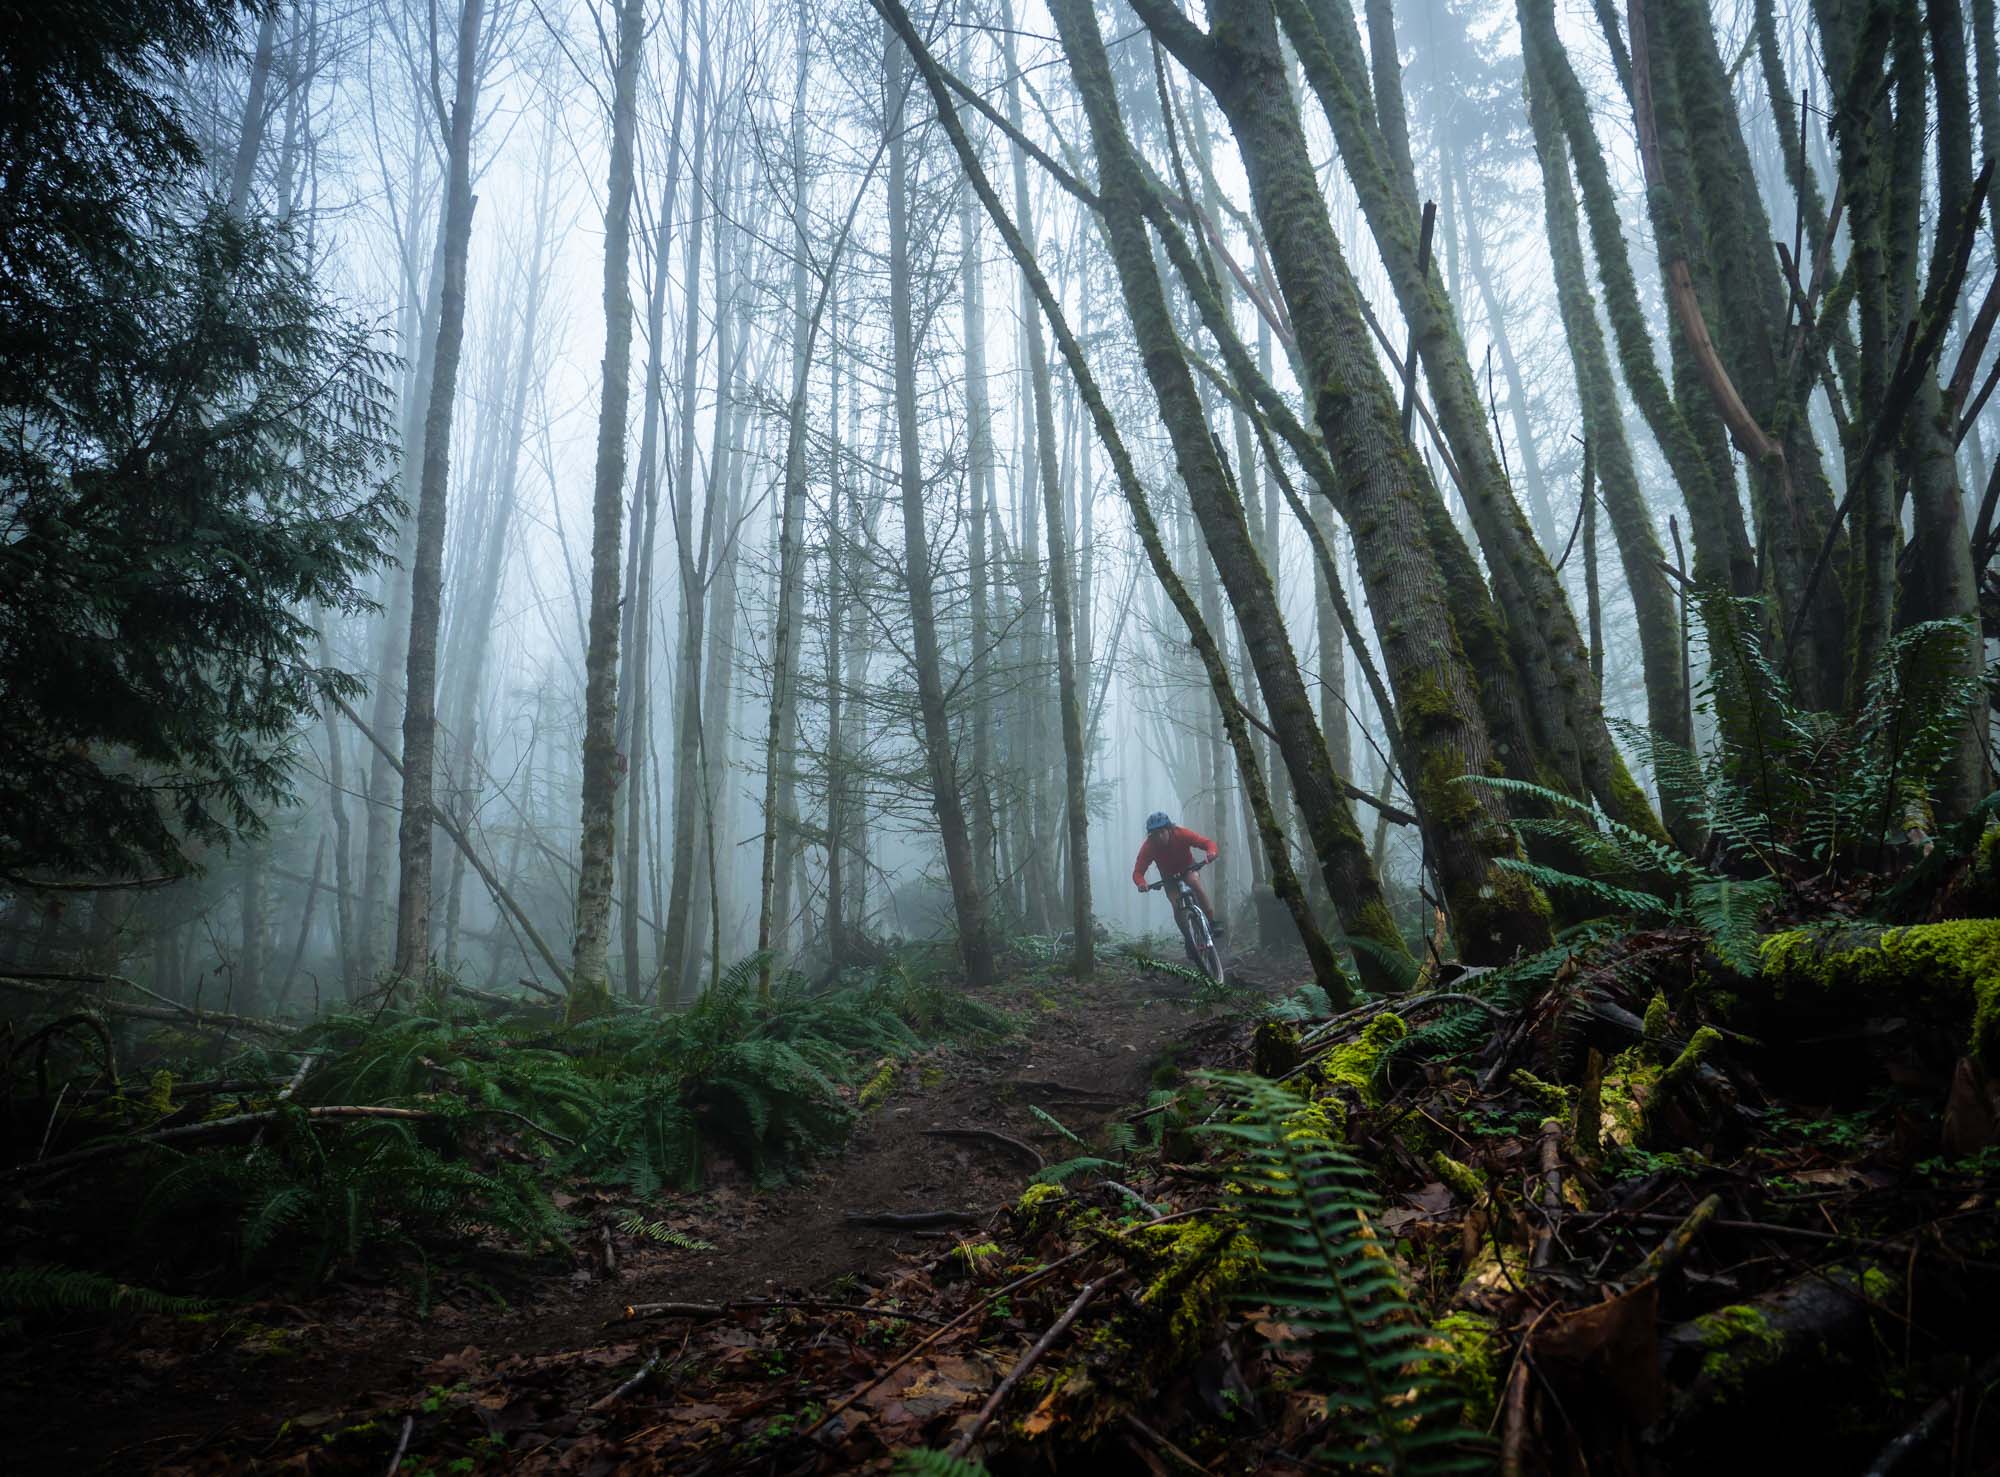 Joey dipping through the woods aboard his Stumpy EVO Alloy on a deep, dank day.